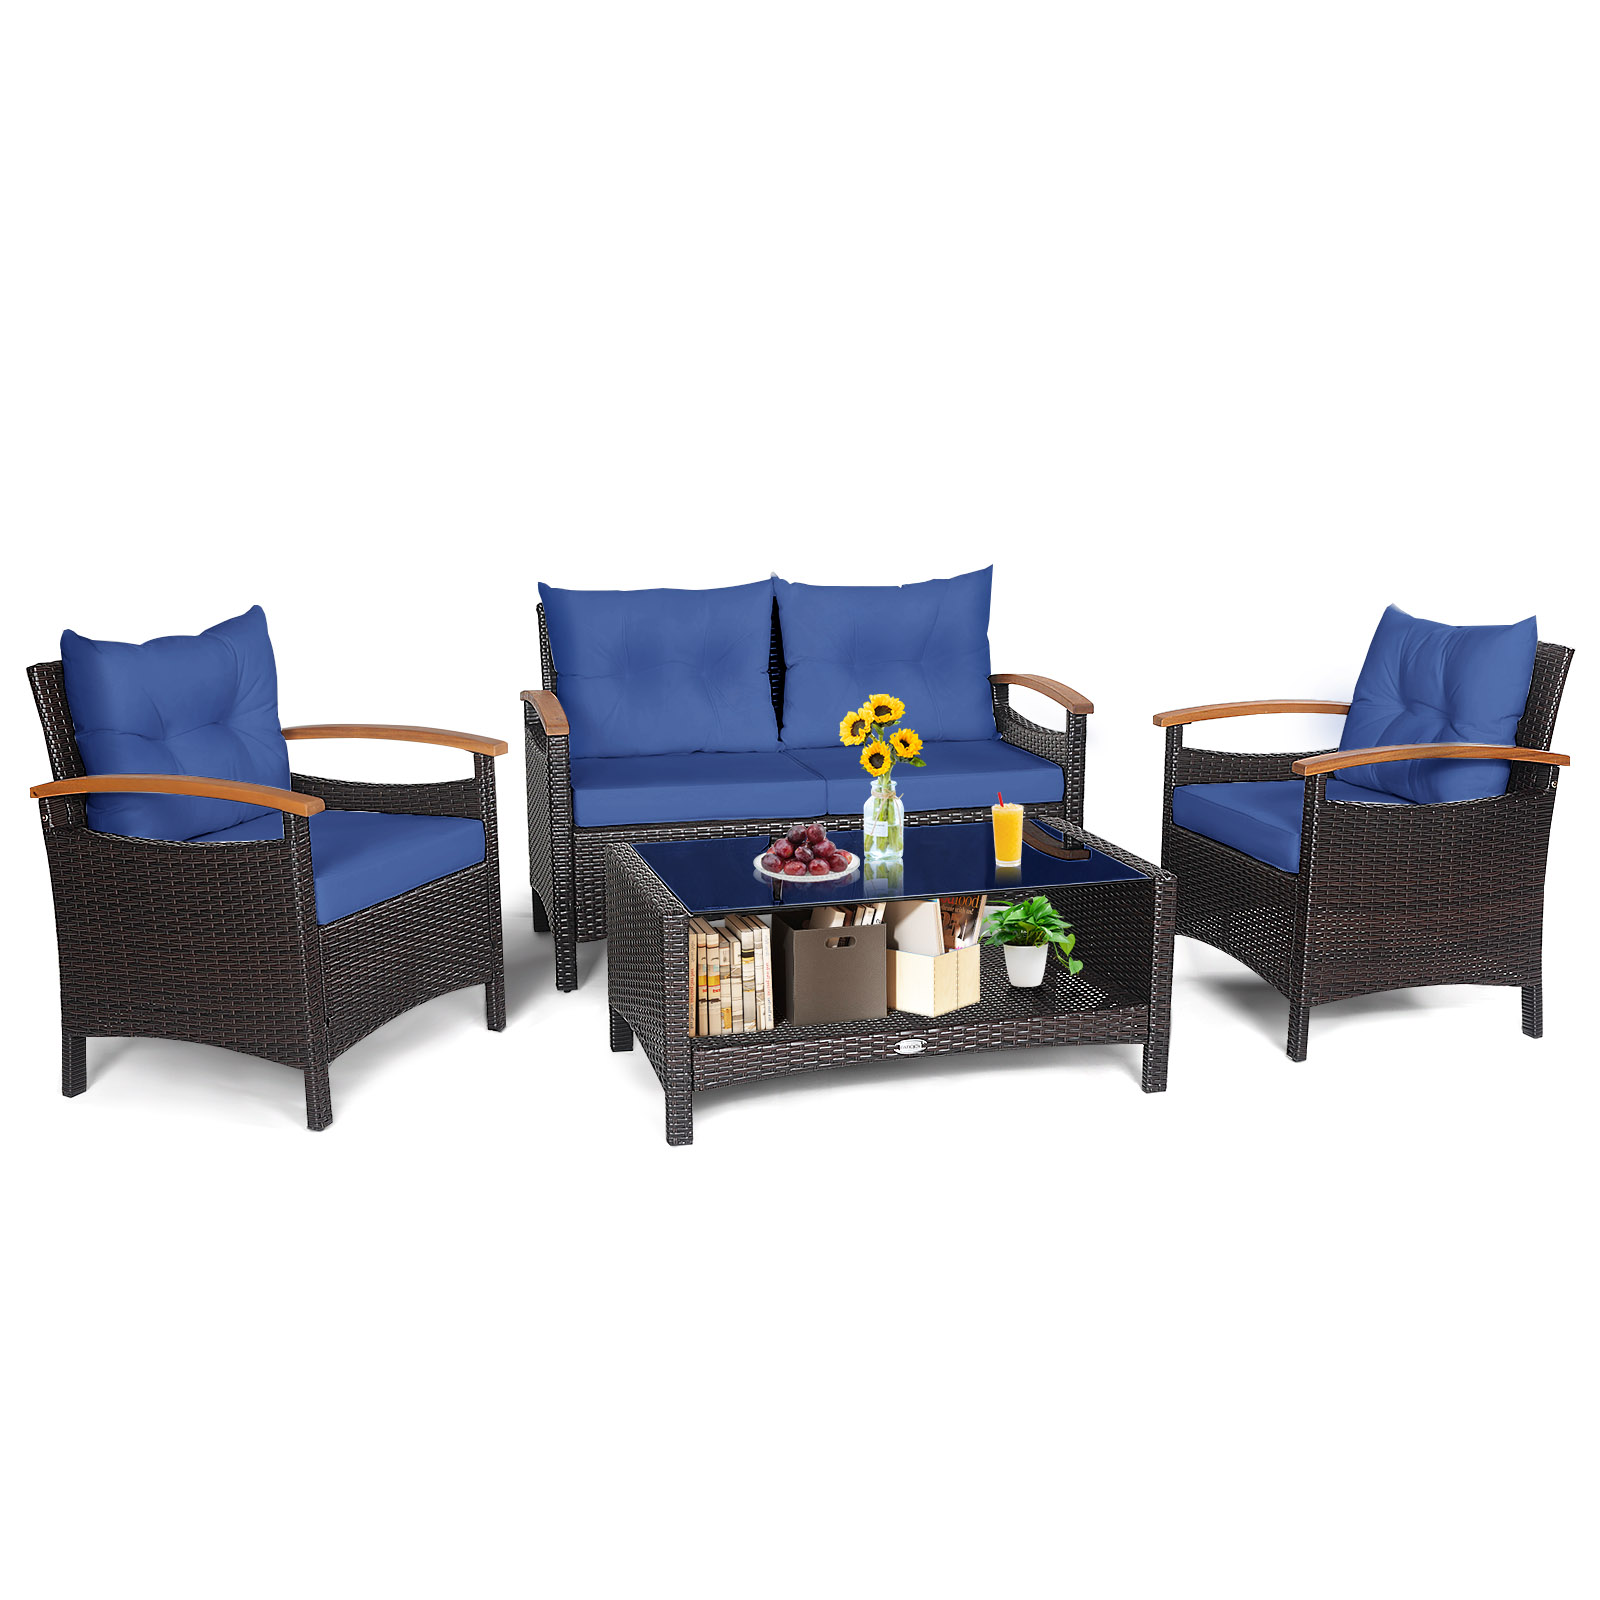 Patiojoy Patio Rattan 4PCS Cushioned Chair Side Table Set Bistro Set Classic Furniture Single Sofa Thick Cushion Loveseat for Garden Navy - image 1 of 7